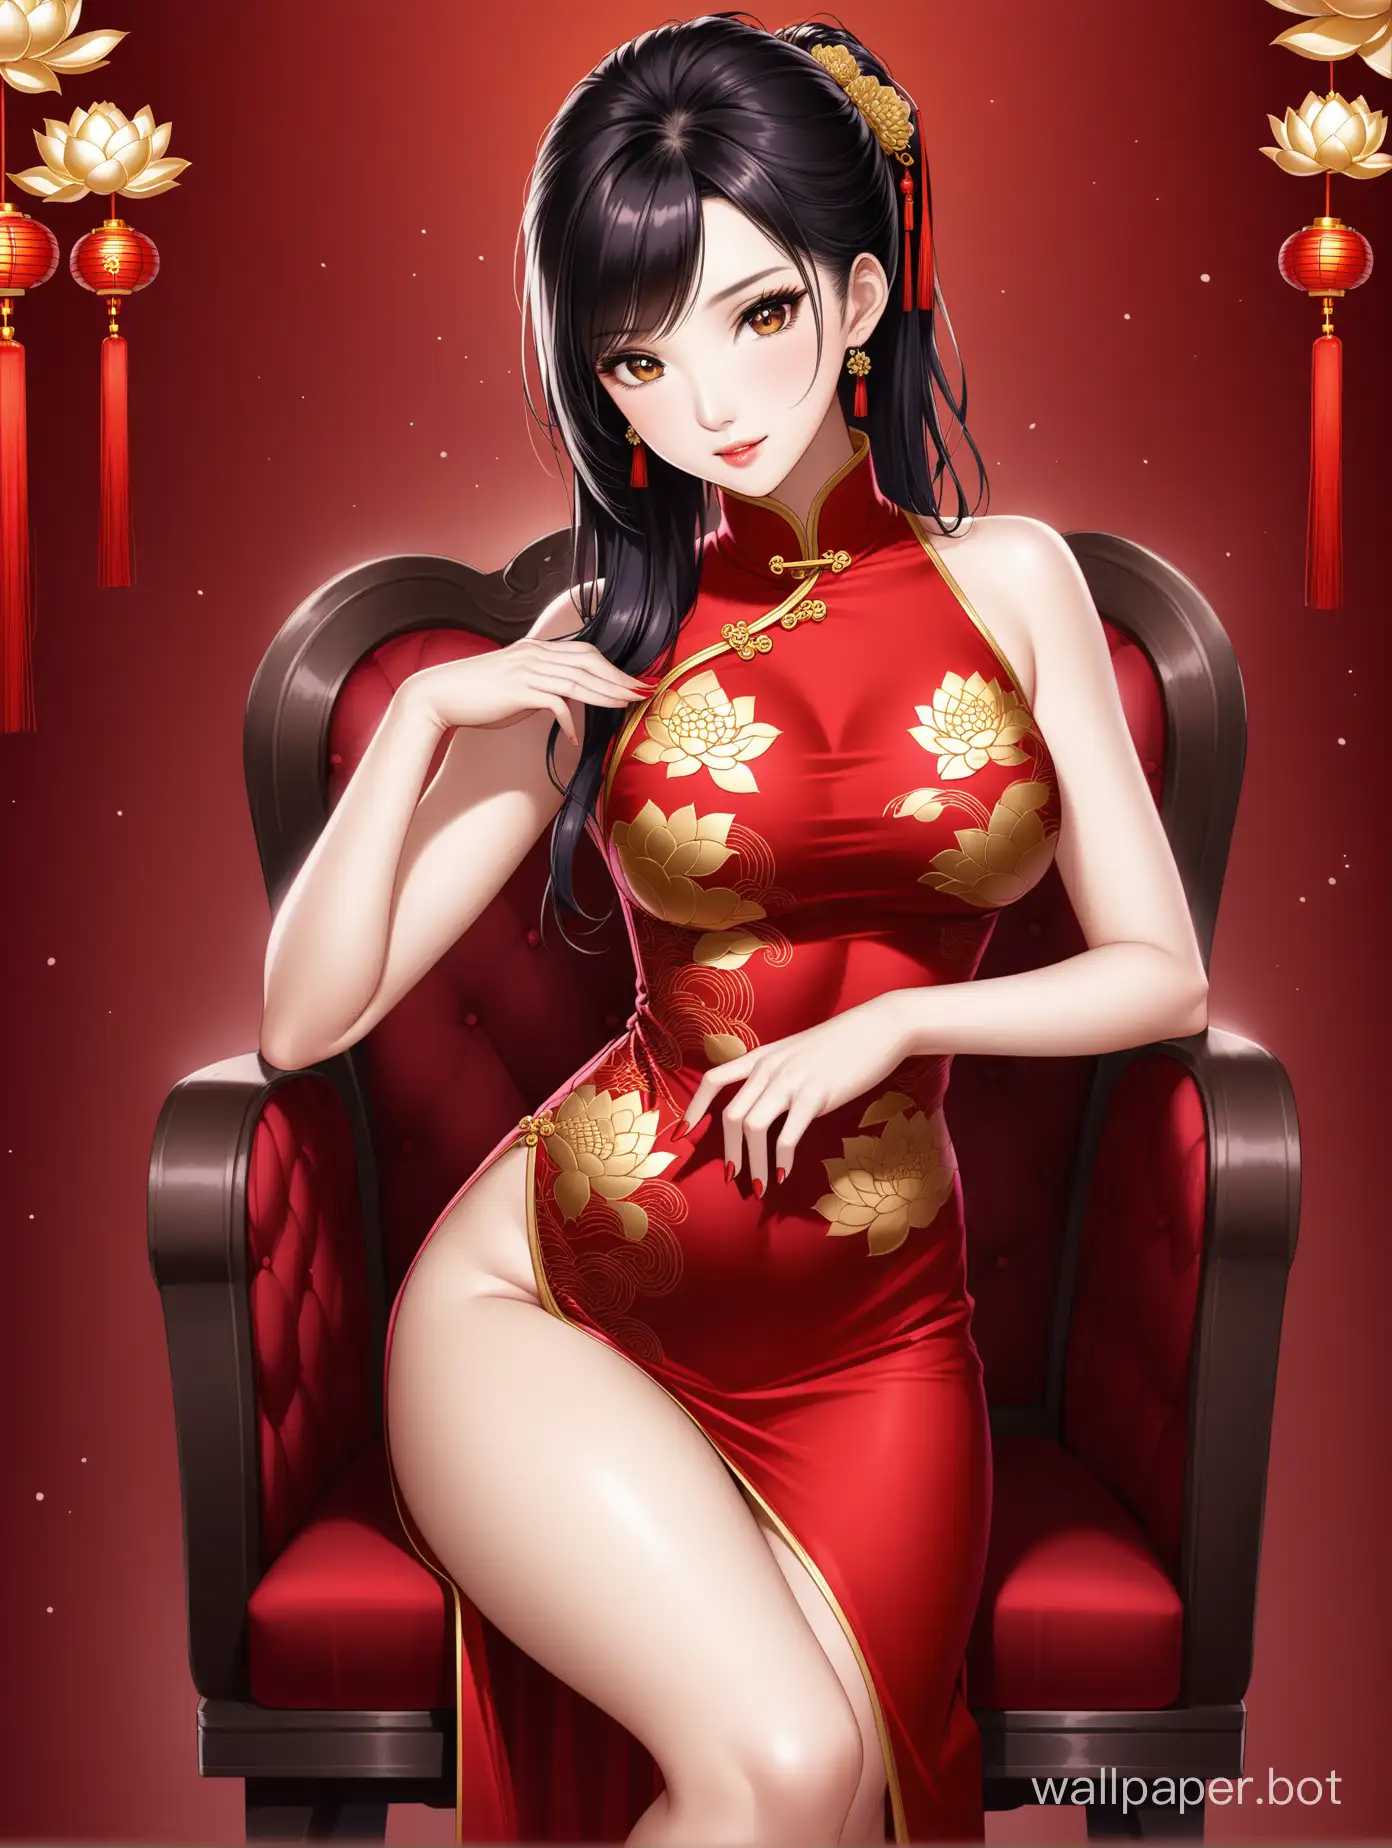 Li Bingbing, Ada Wong, long slit cheongsam with gold lotus flower motif, slim body, big breasts, sitting on chair pose, red 10 cm pump high heels, left hand on left thigh, right hand near right chest.